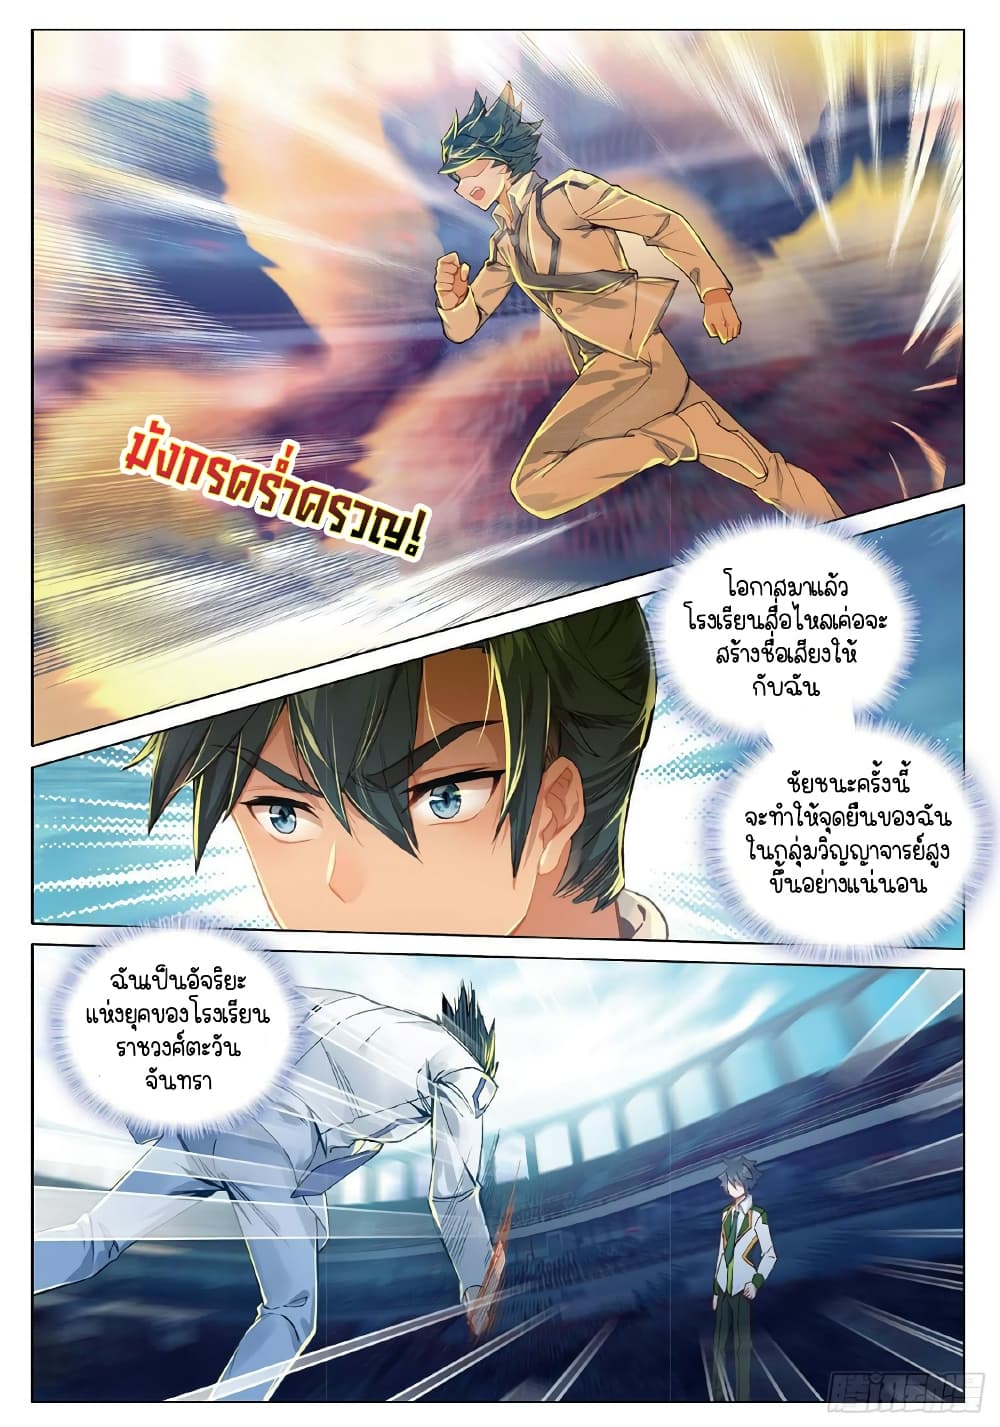 Douluo Dalu 3: The Legend of the Dragon King 266-พลังของมังกร